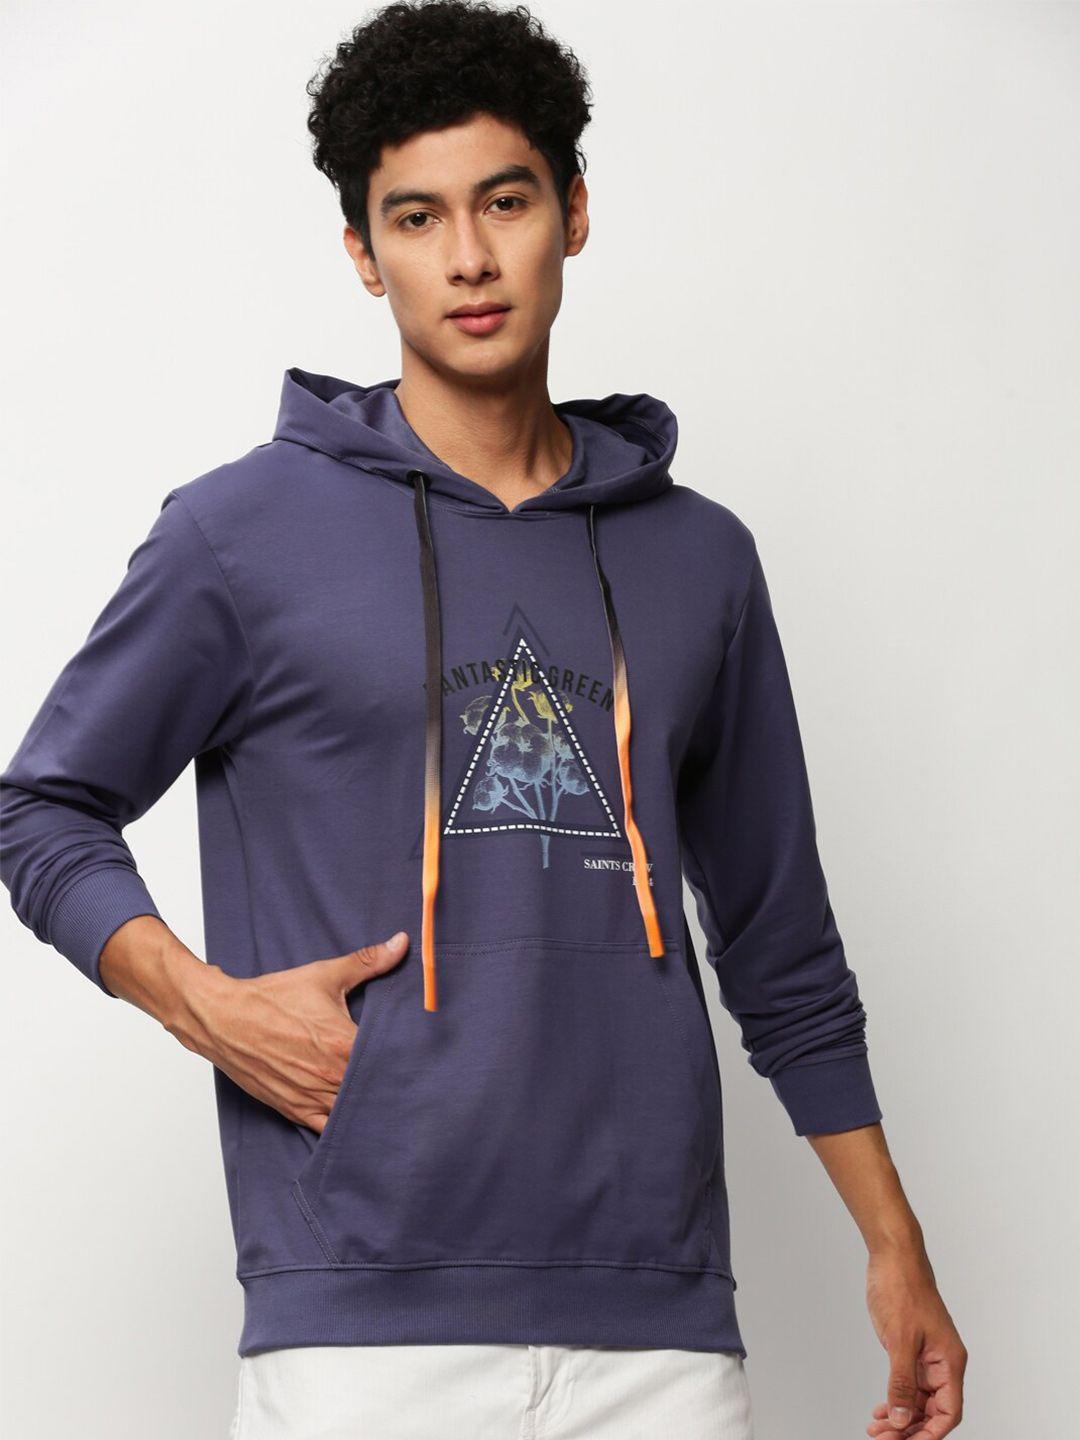 showoff graphic printed hooded pullover cotton sweatshirt